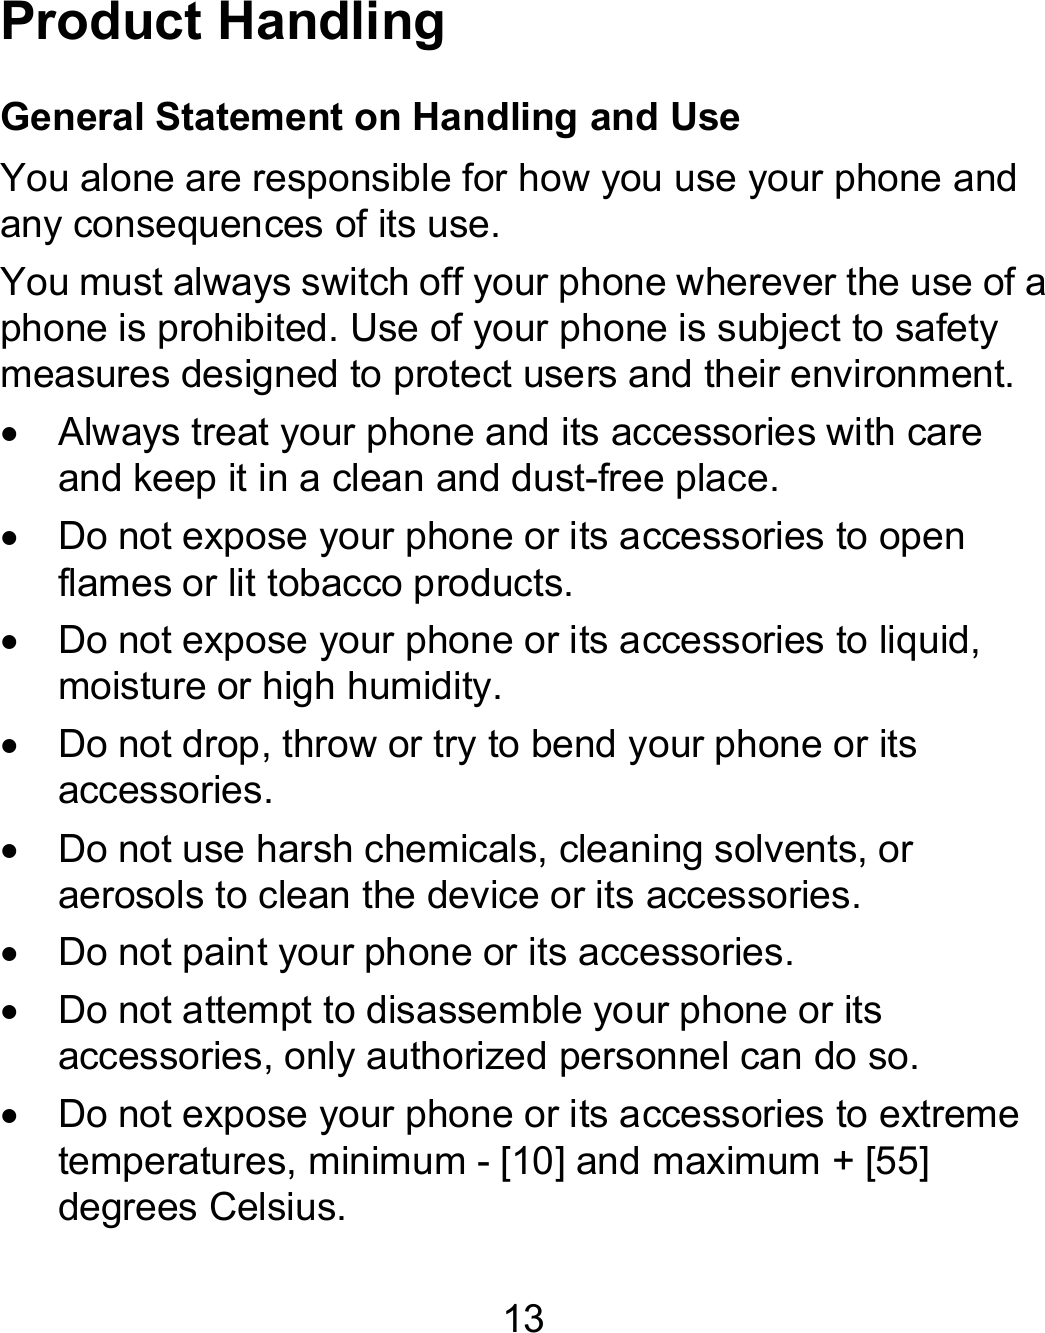 13 Product Handling General Statement on Handling and Use You alone are responsible for how you use your phone and any consequences of its use. You must always switch off your phone wherever the use of a phone is prohibited. Use of your phone is subject to safety measures designed to protect users and their environment.   Always treat your phone and its accessories with care and keep it in a clean and dust-free place.   Do not expose your phone or its accessories to open flames or lit tobacco products.   Do not expose your phone or its accessories to liquid, moisture or high humidity.   Do not drop, throw or try to bend your phone or its accessories.   Do not use harsh chemicals, cleaning solvents, or aerosols to clean the device or its accessories.   Do not paint your phone or its accessories.   Do not attempt to disassemble your phone or its accessories, only authorized personnel can do so.   Do not expose your phone or its accessories to extreme temperatures, minimum - [10] and maximum + [55] degrees Celsius. 